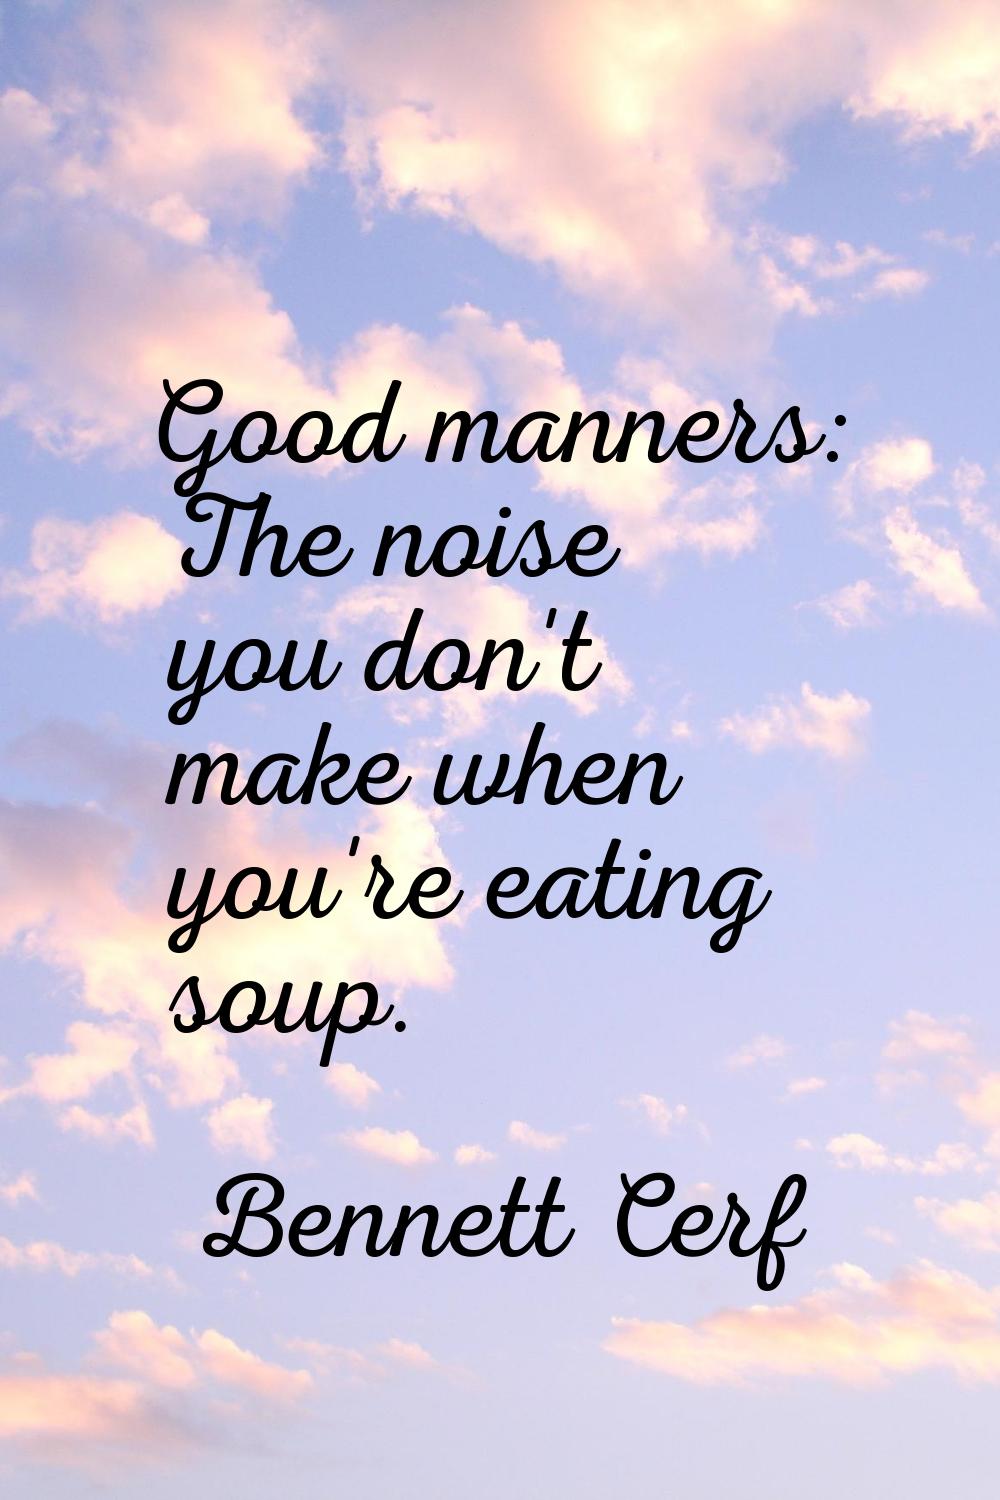 Good manners: The noise you don't make when you're eating soup.